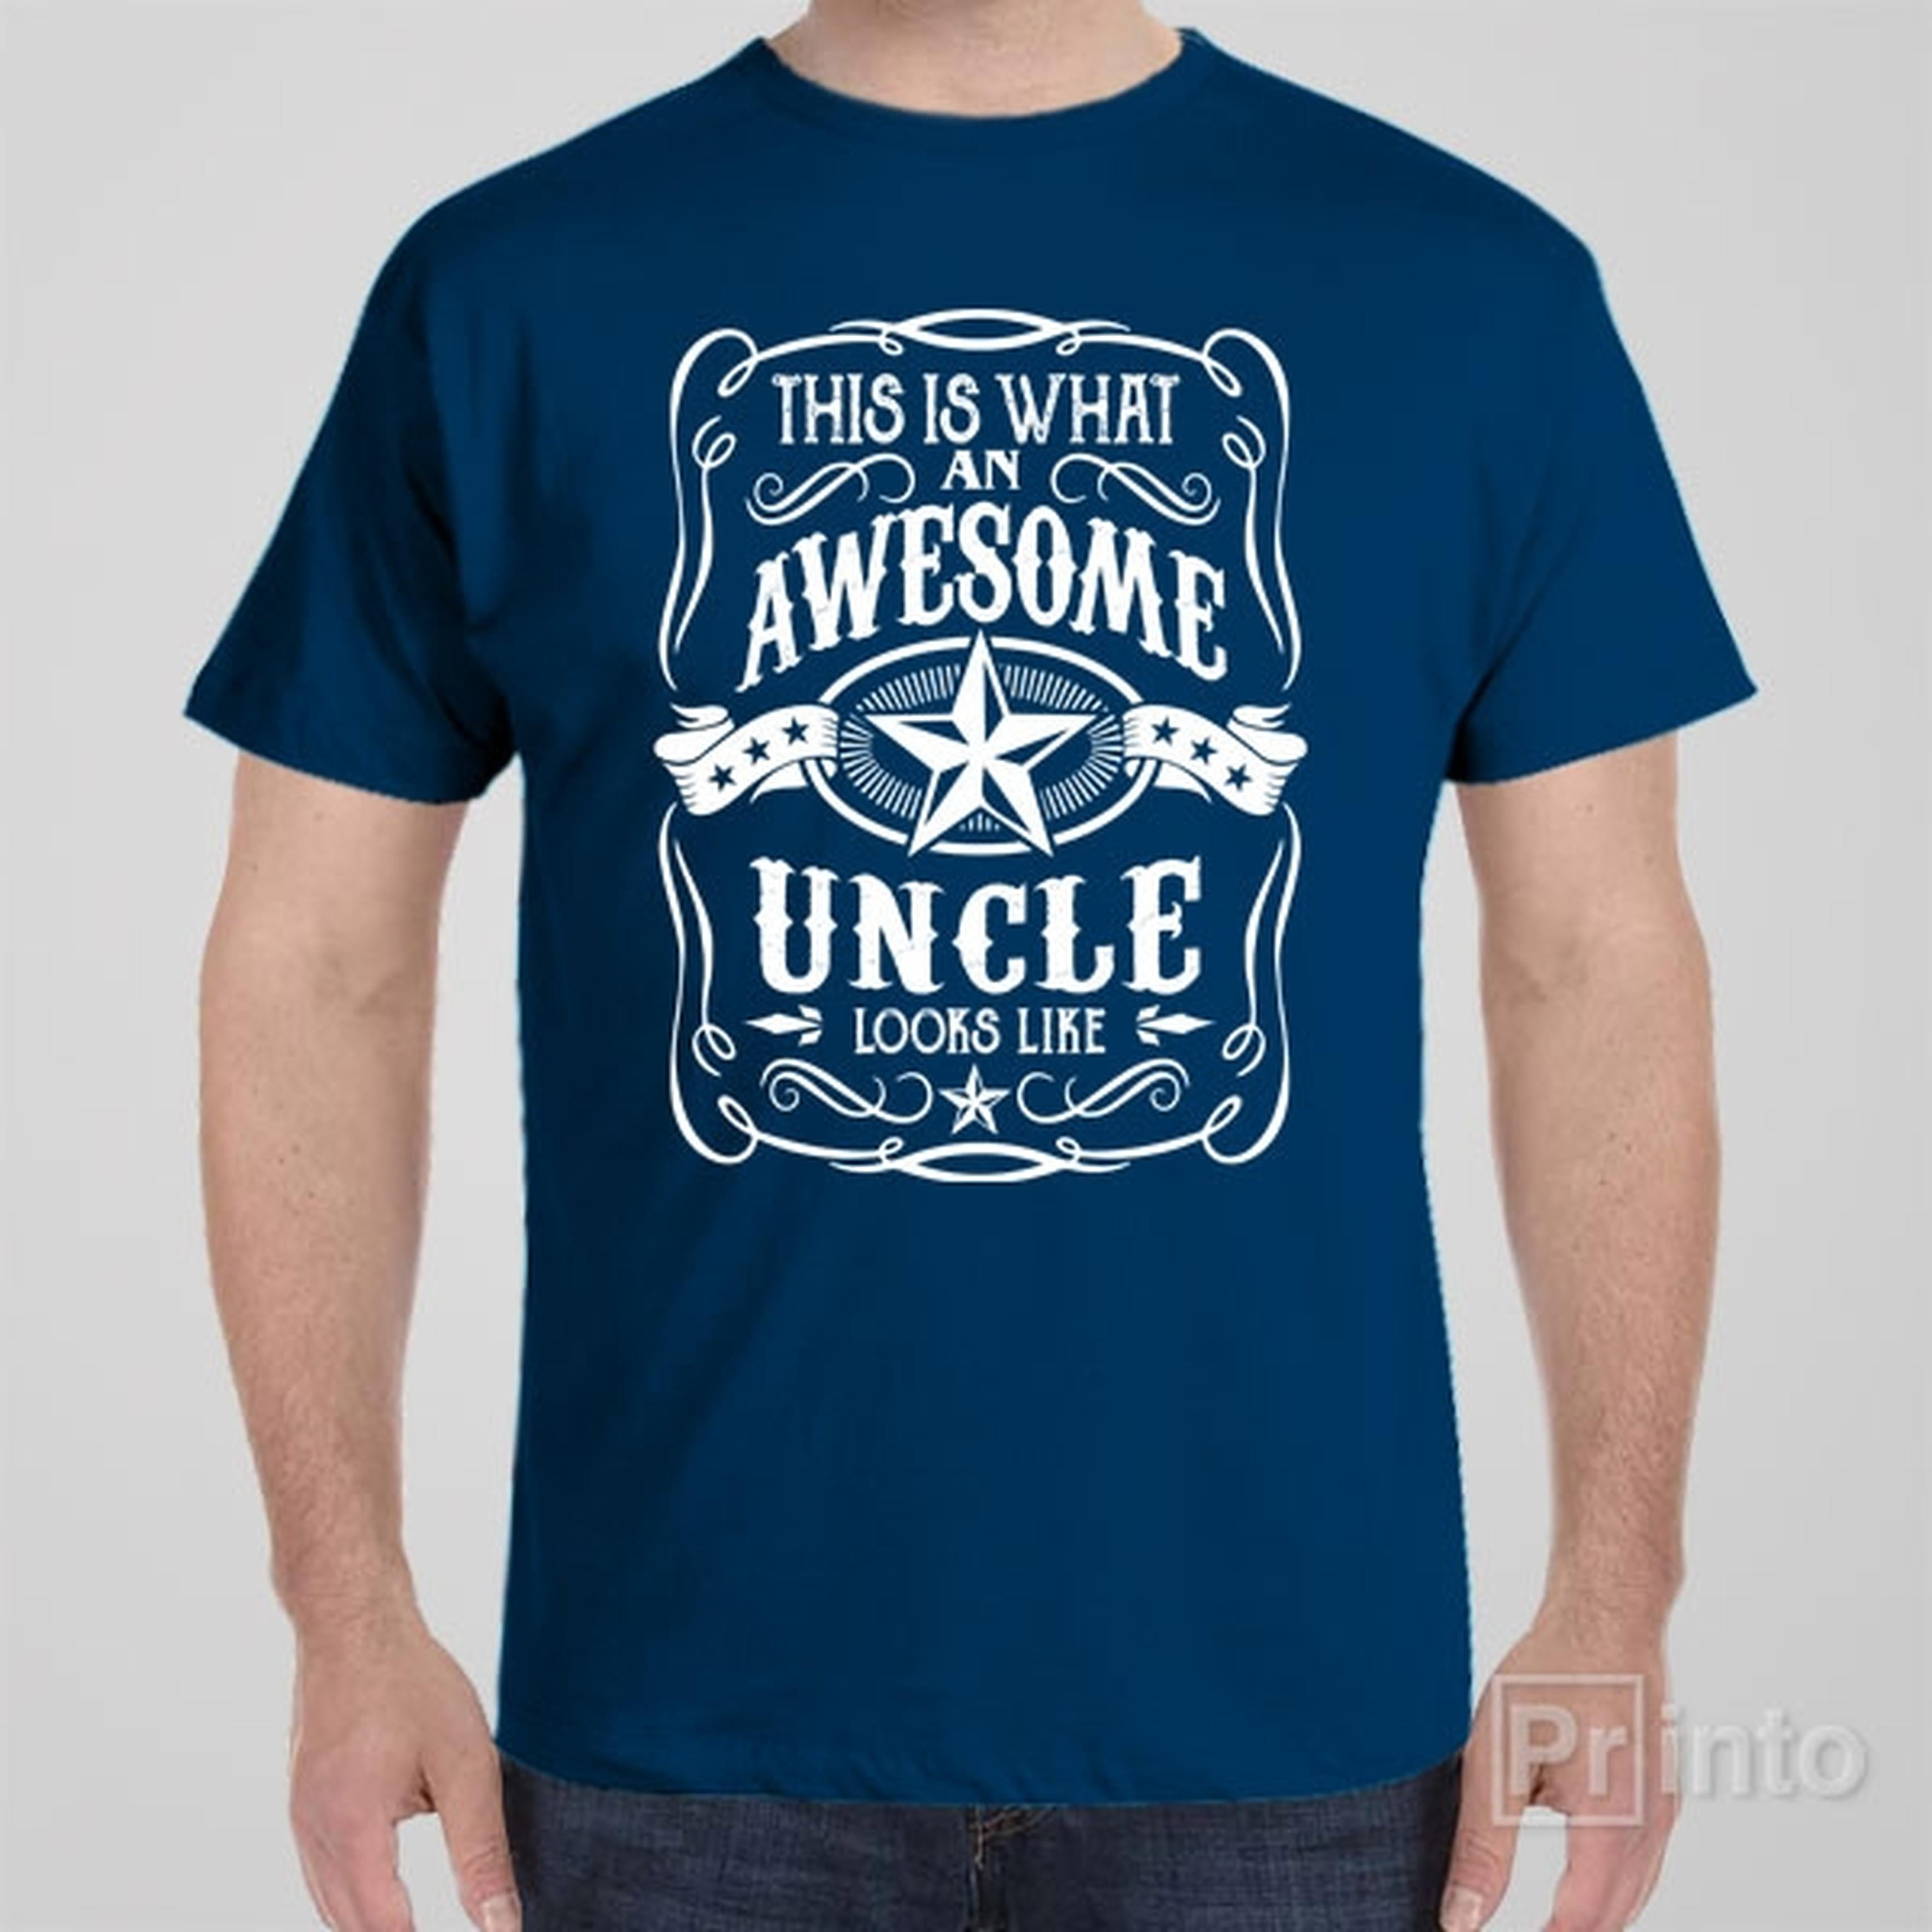 this-is-what-an-awesome-uncle-looks-like-t-shirt